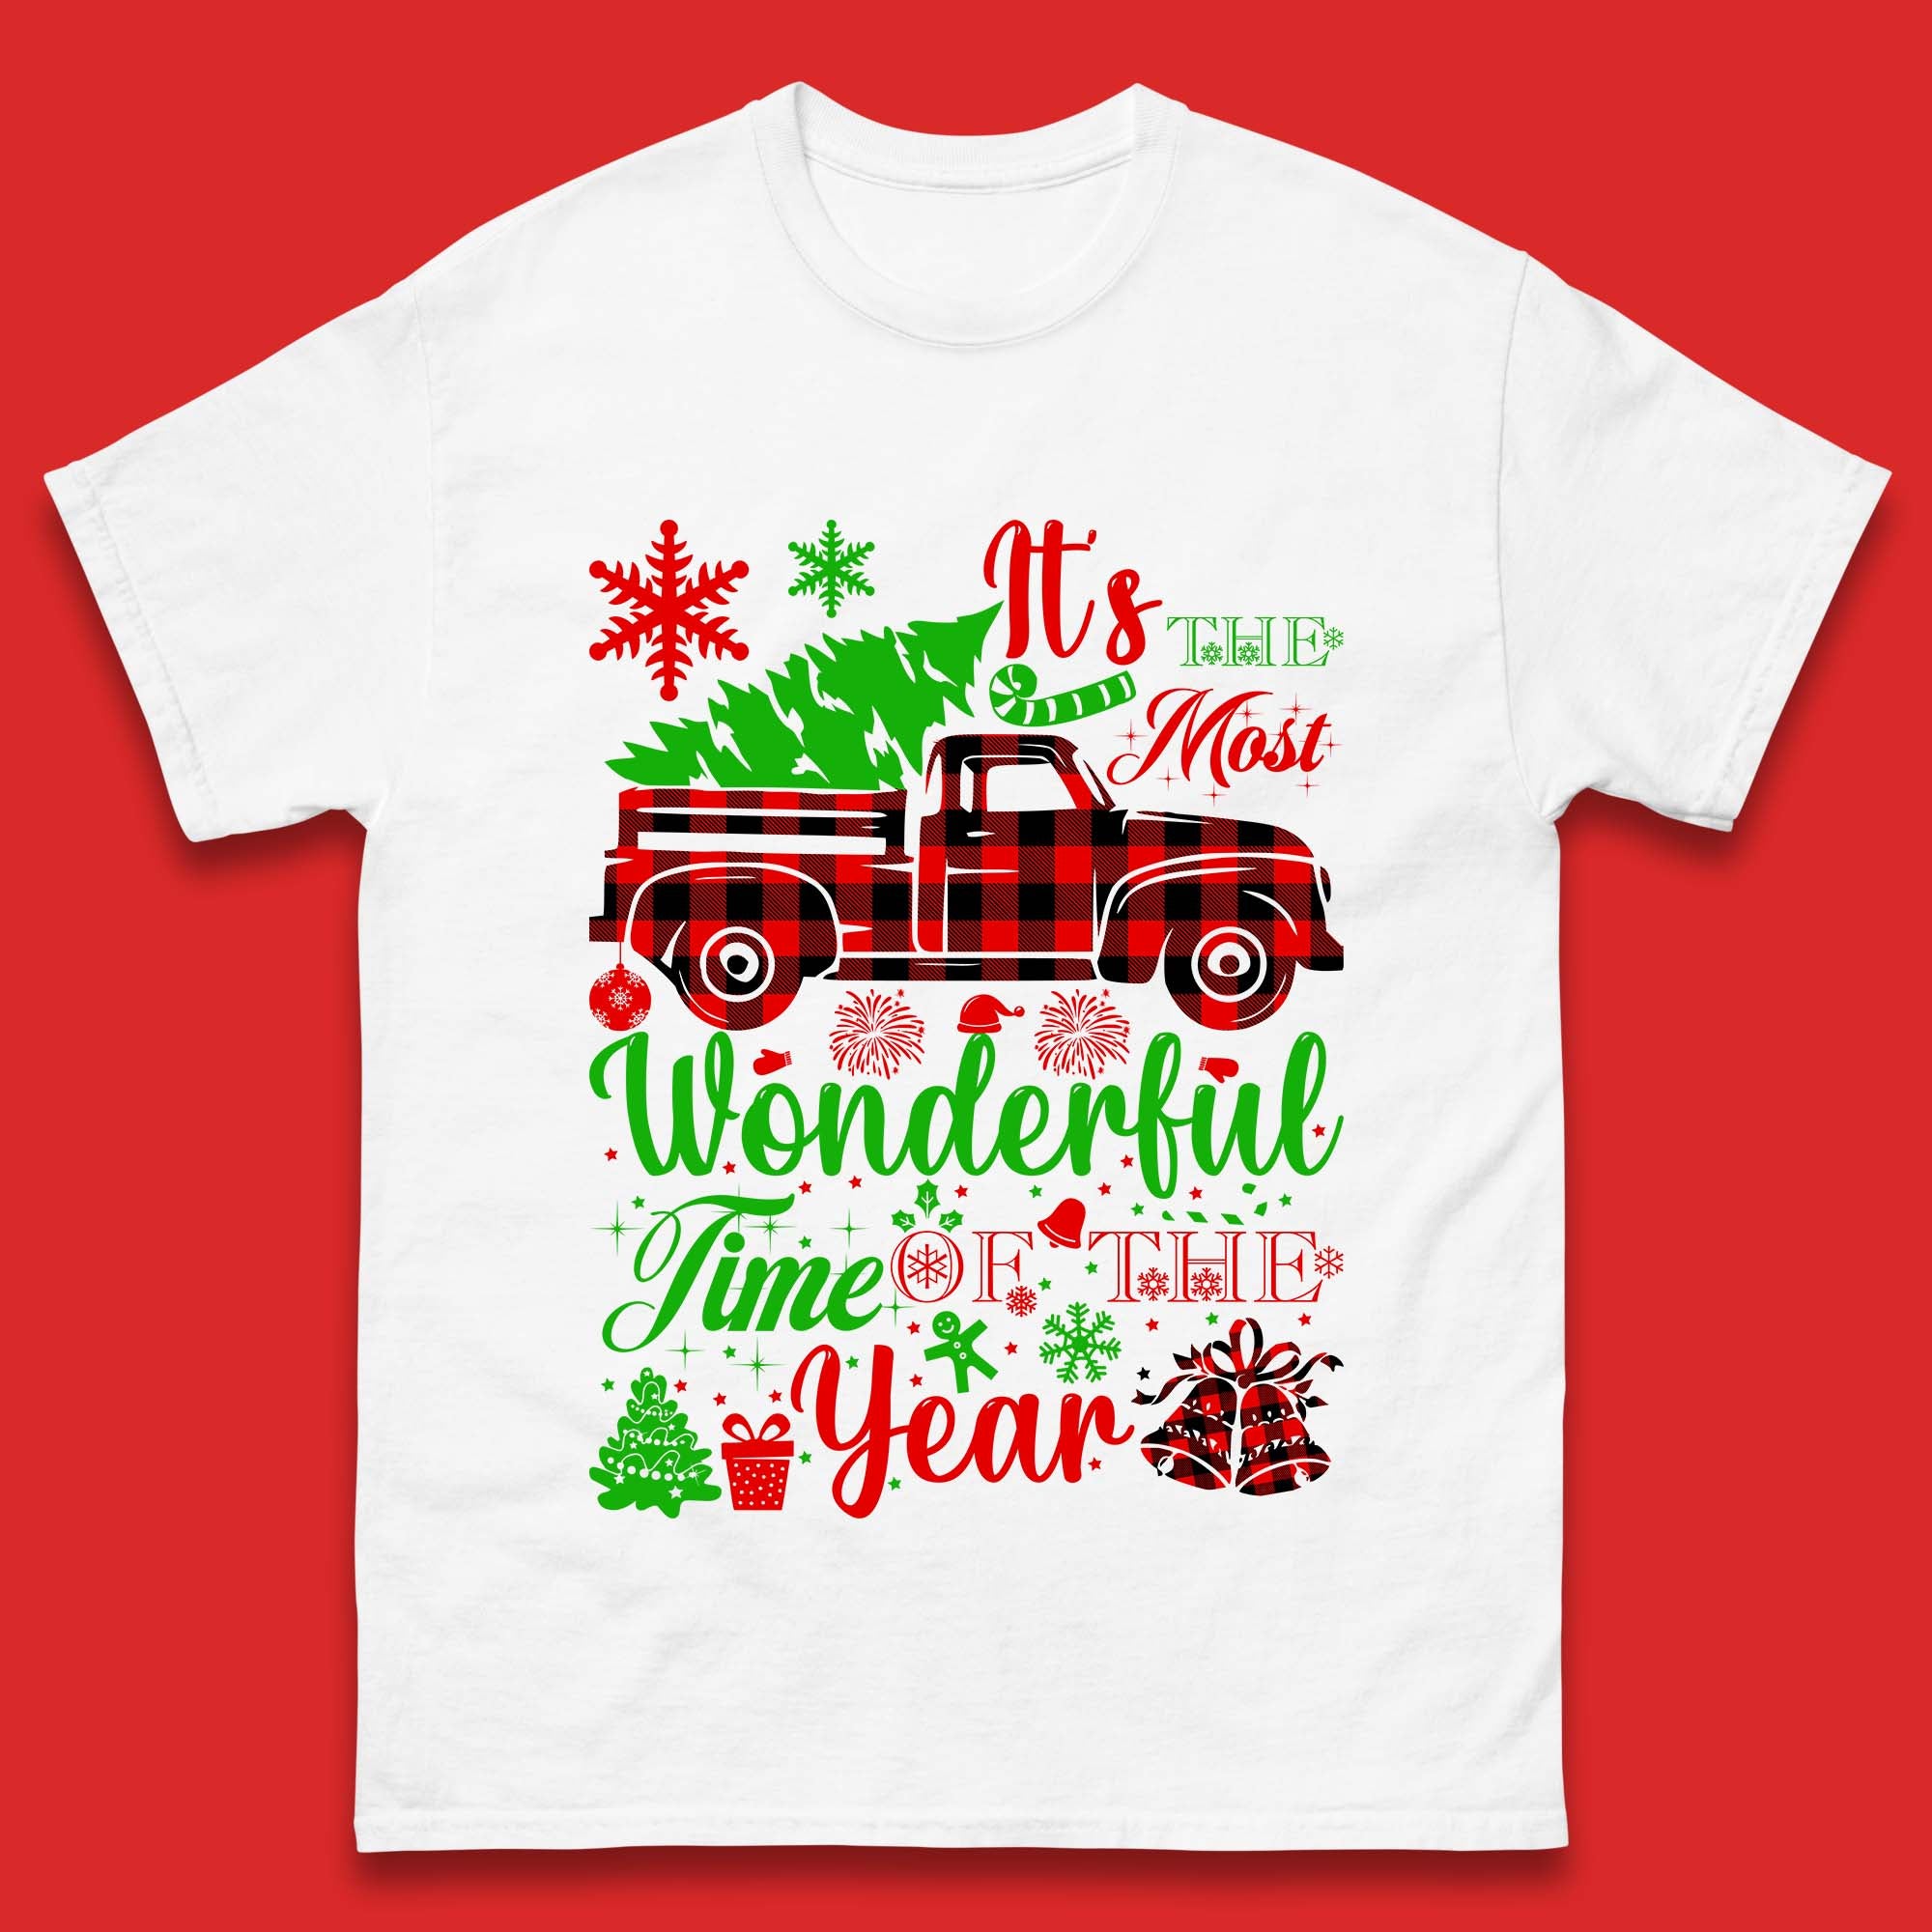 Wonderful Time Of The Year Christmas Mens T-Shirt